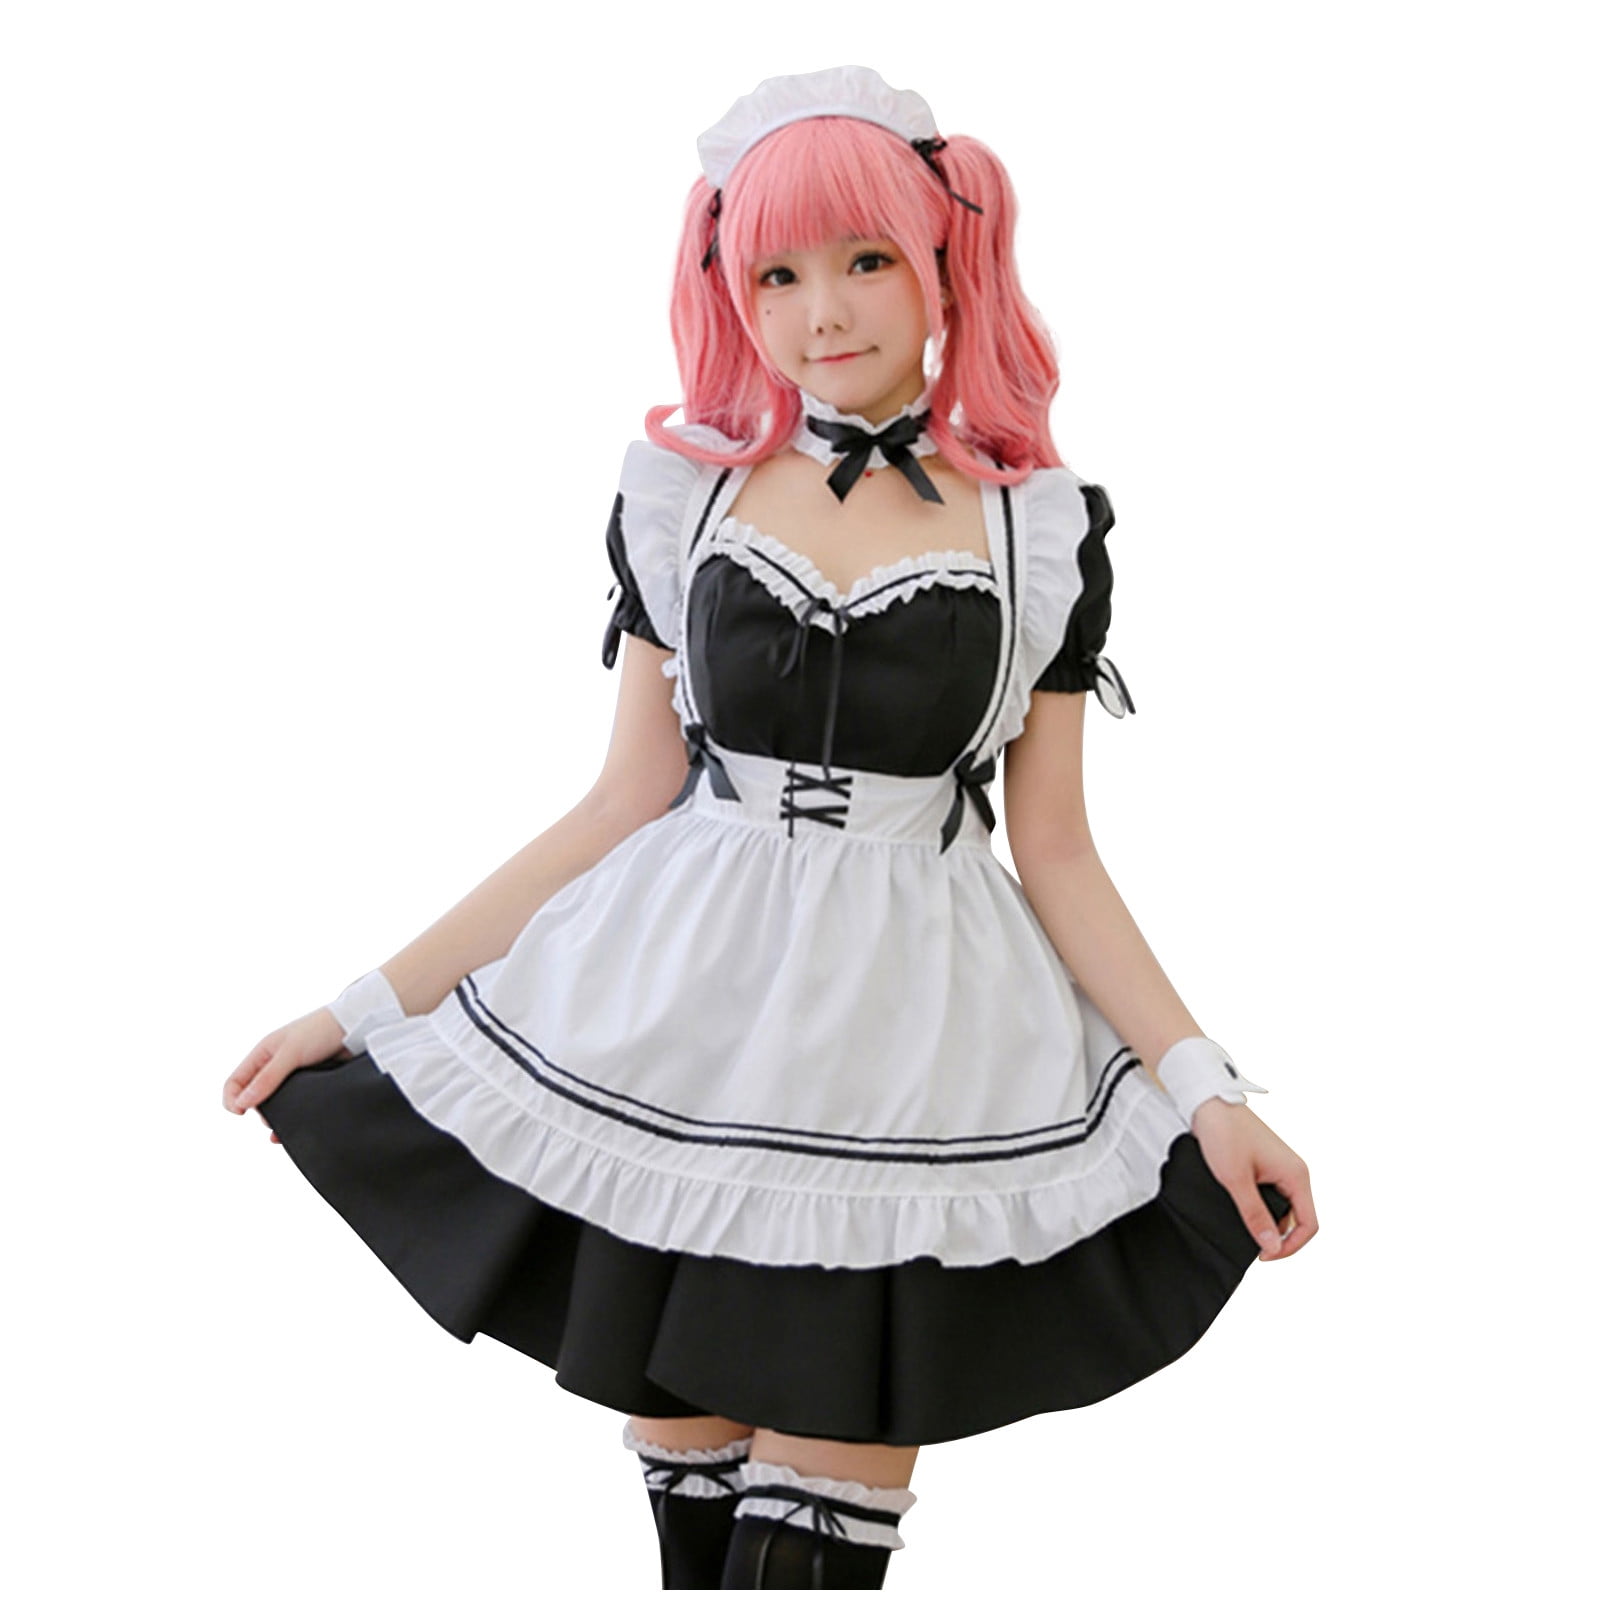 cosplay  Cosplay costumes, Cosplay anime, Cute cosplay